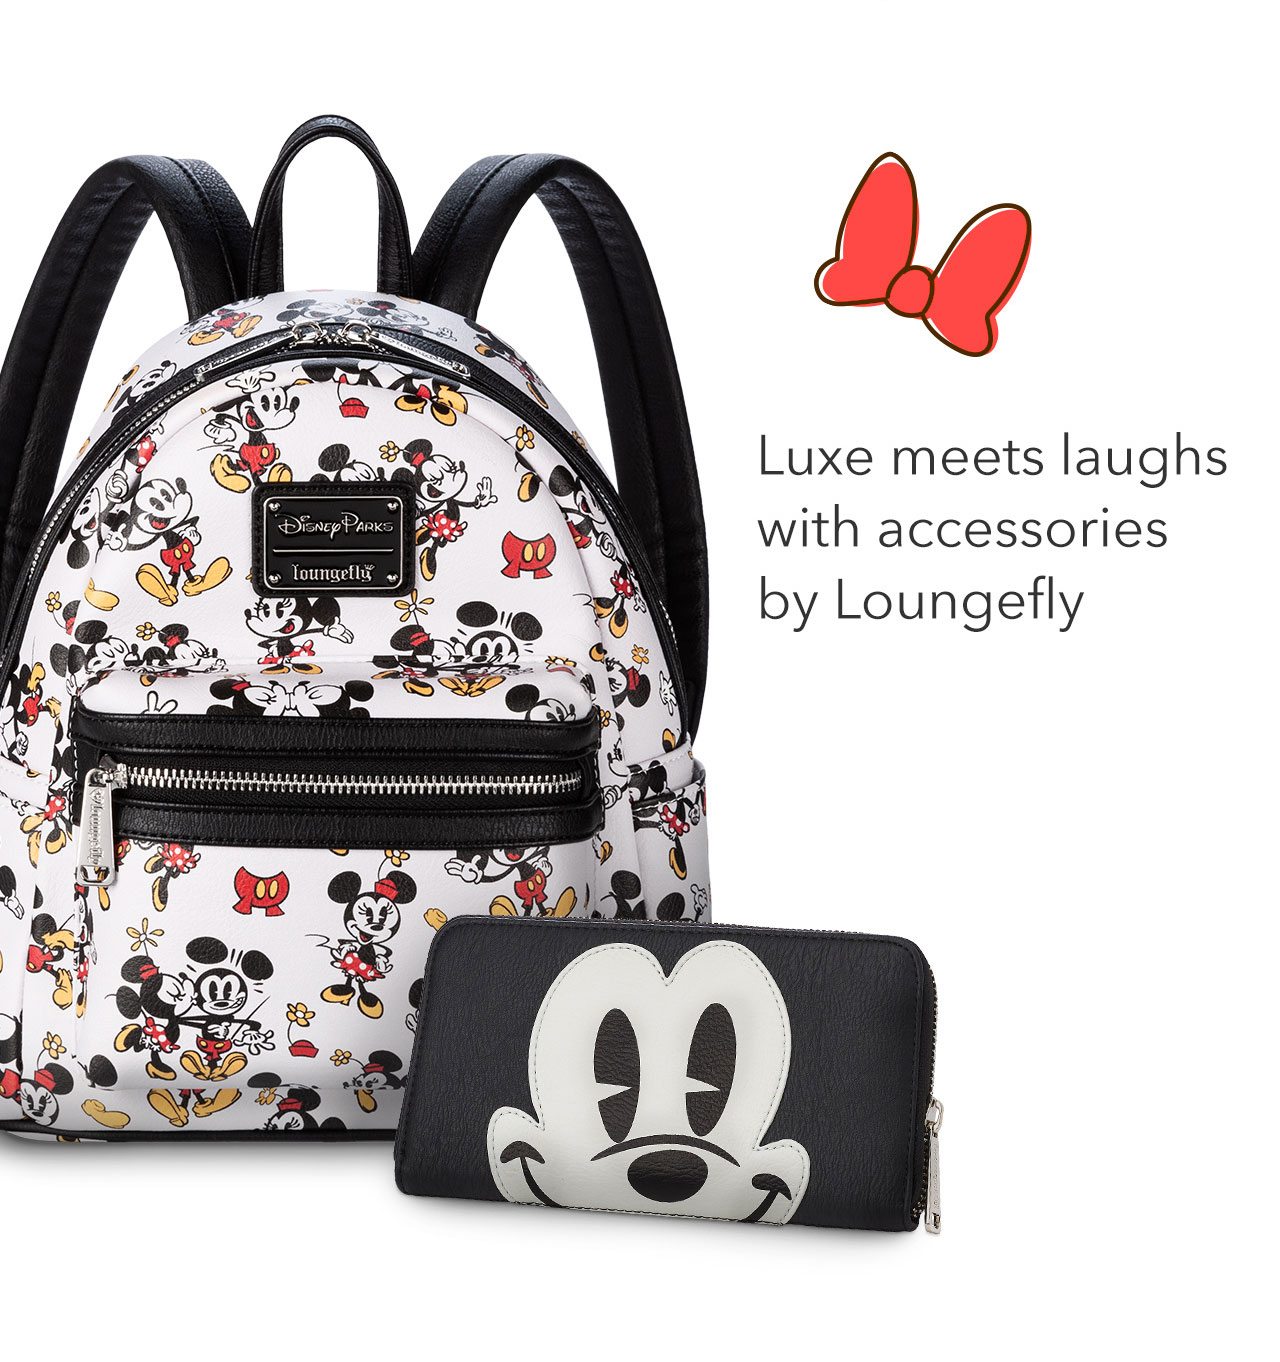 Luxe meets laughs with accessories by Loungefly